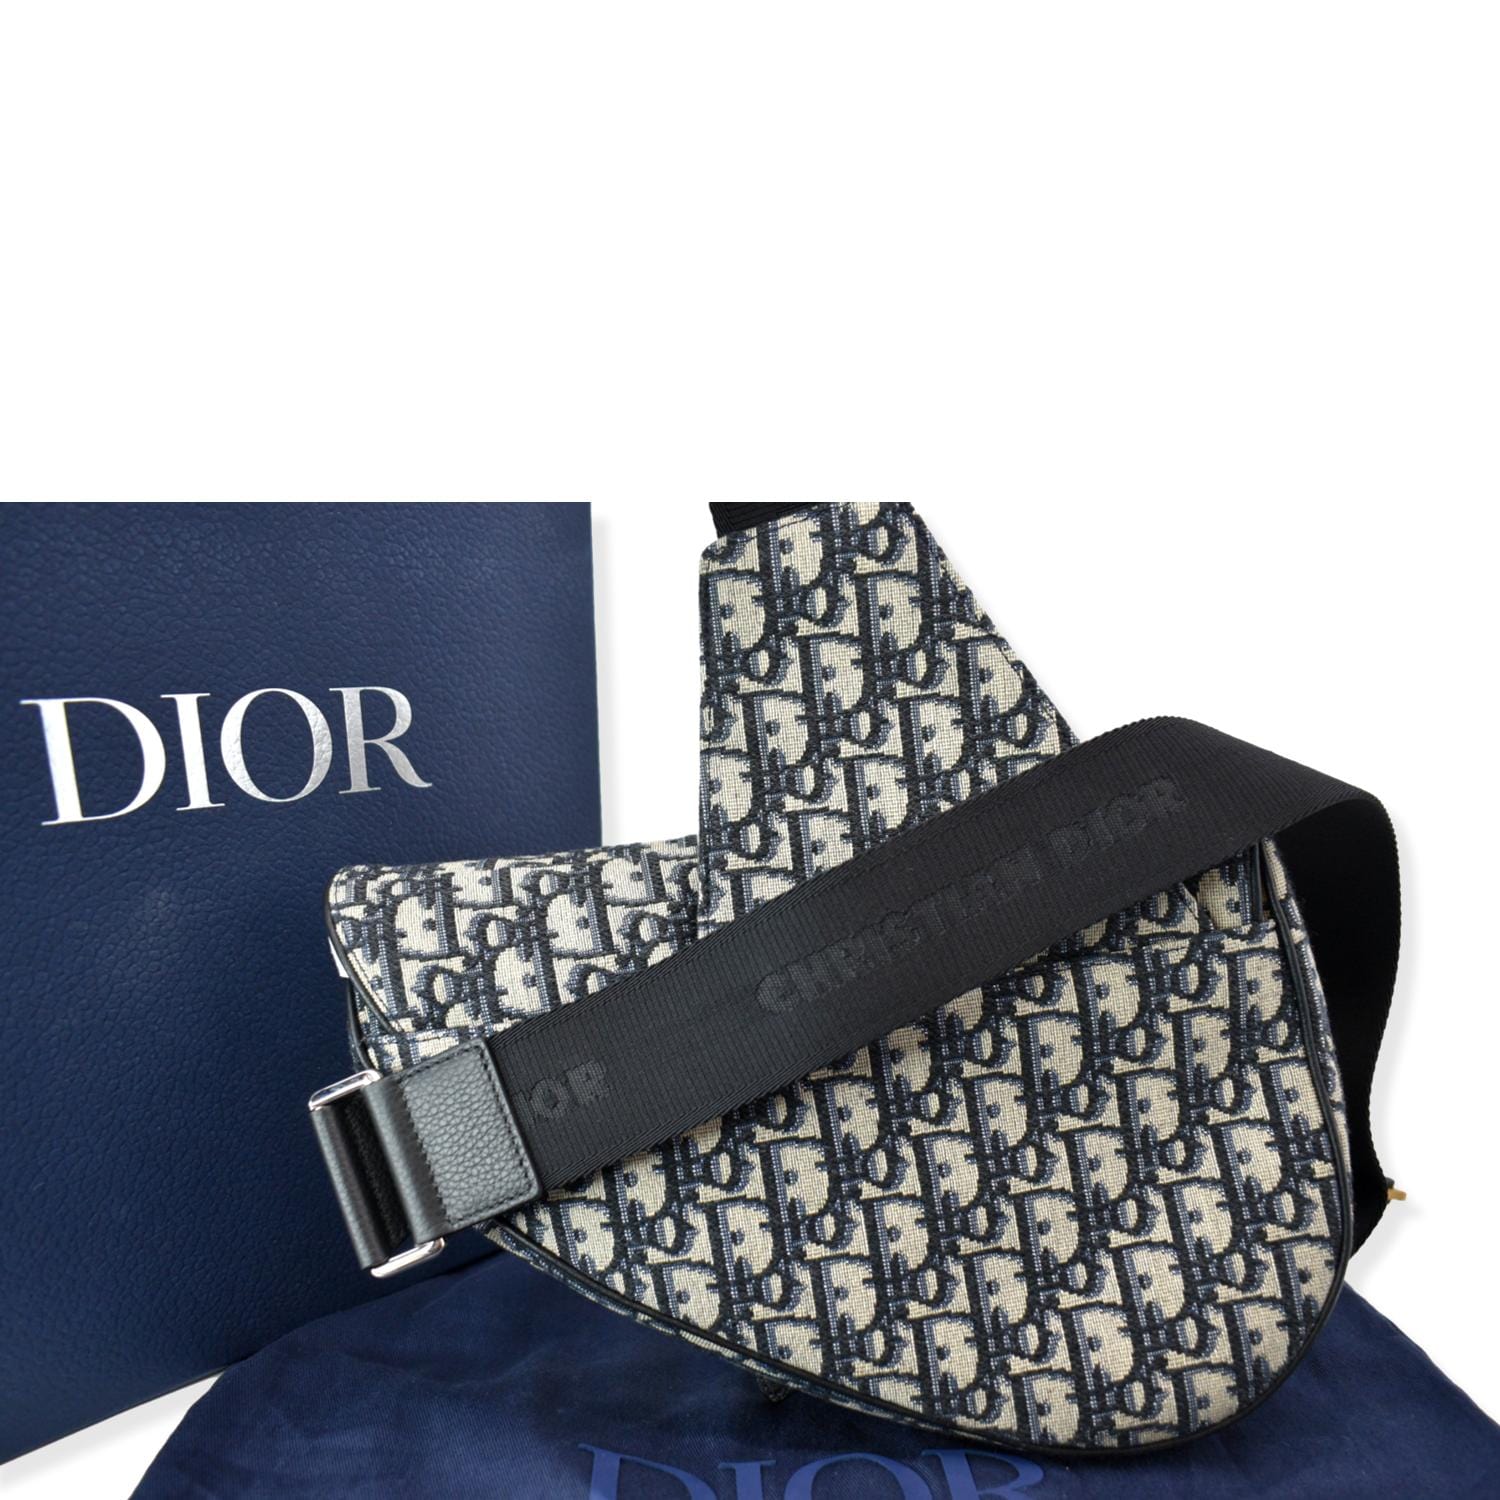 Dior Saddle Bag🐈‍⬛ up online very soon! stay tuned!! #diorvibe